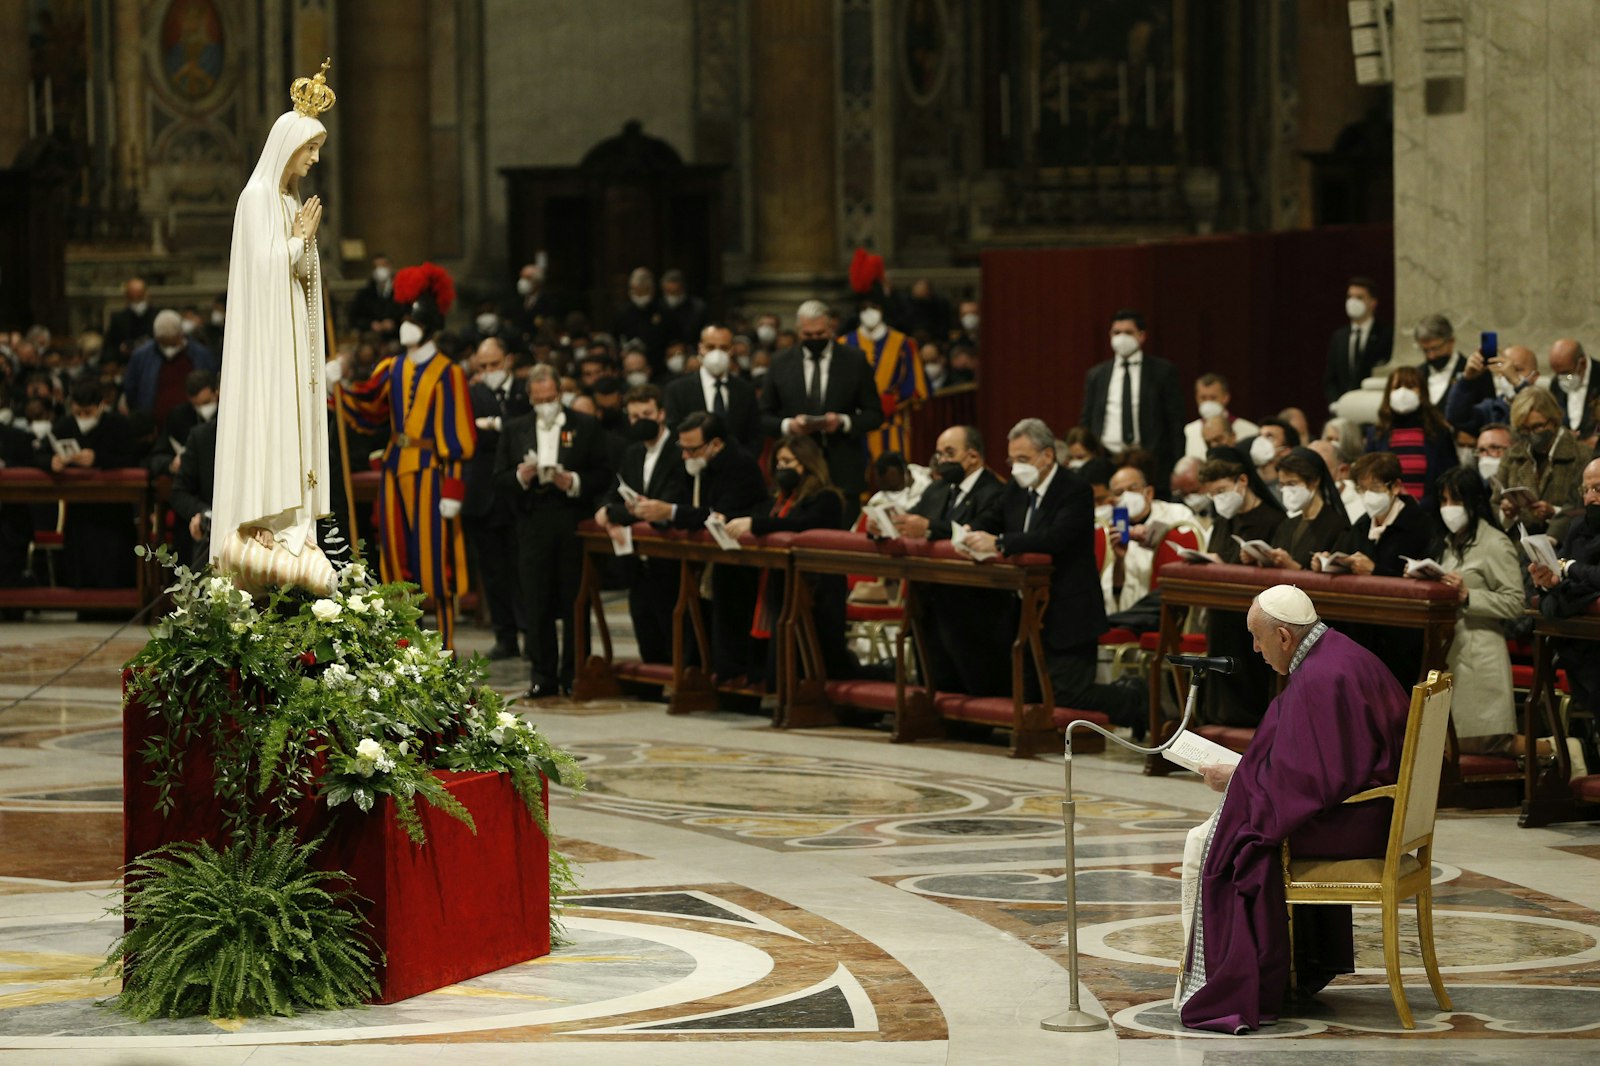 Pope Francis consecrates the world and, in particular, Ukraine and Russia to the Immaculate Heart of Mary during a Lenten penance service in St. Peter's Basilica at the Vatican March 25, 2022. (CNS photo/Paul Haring)